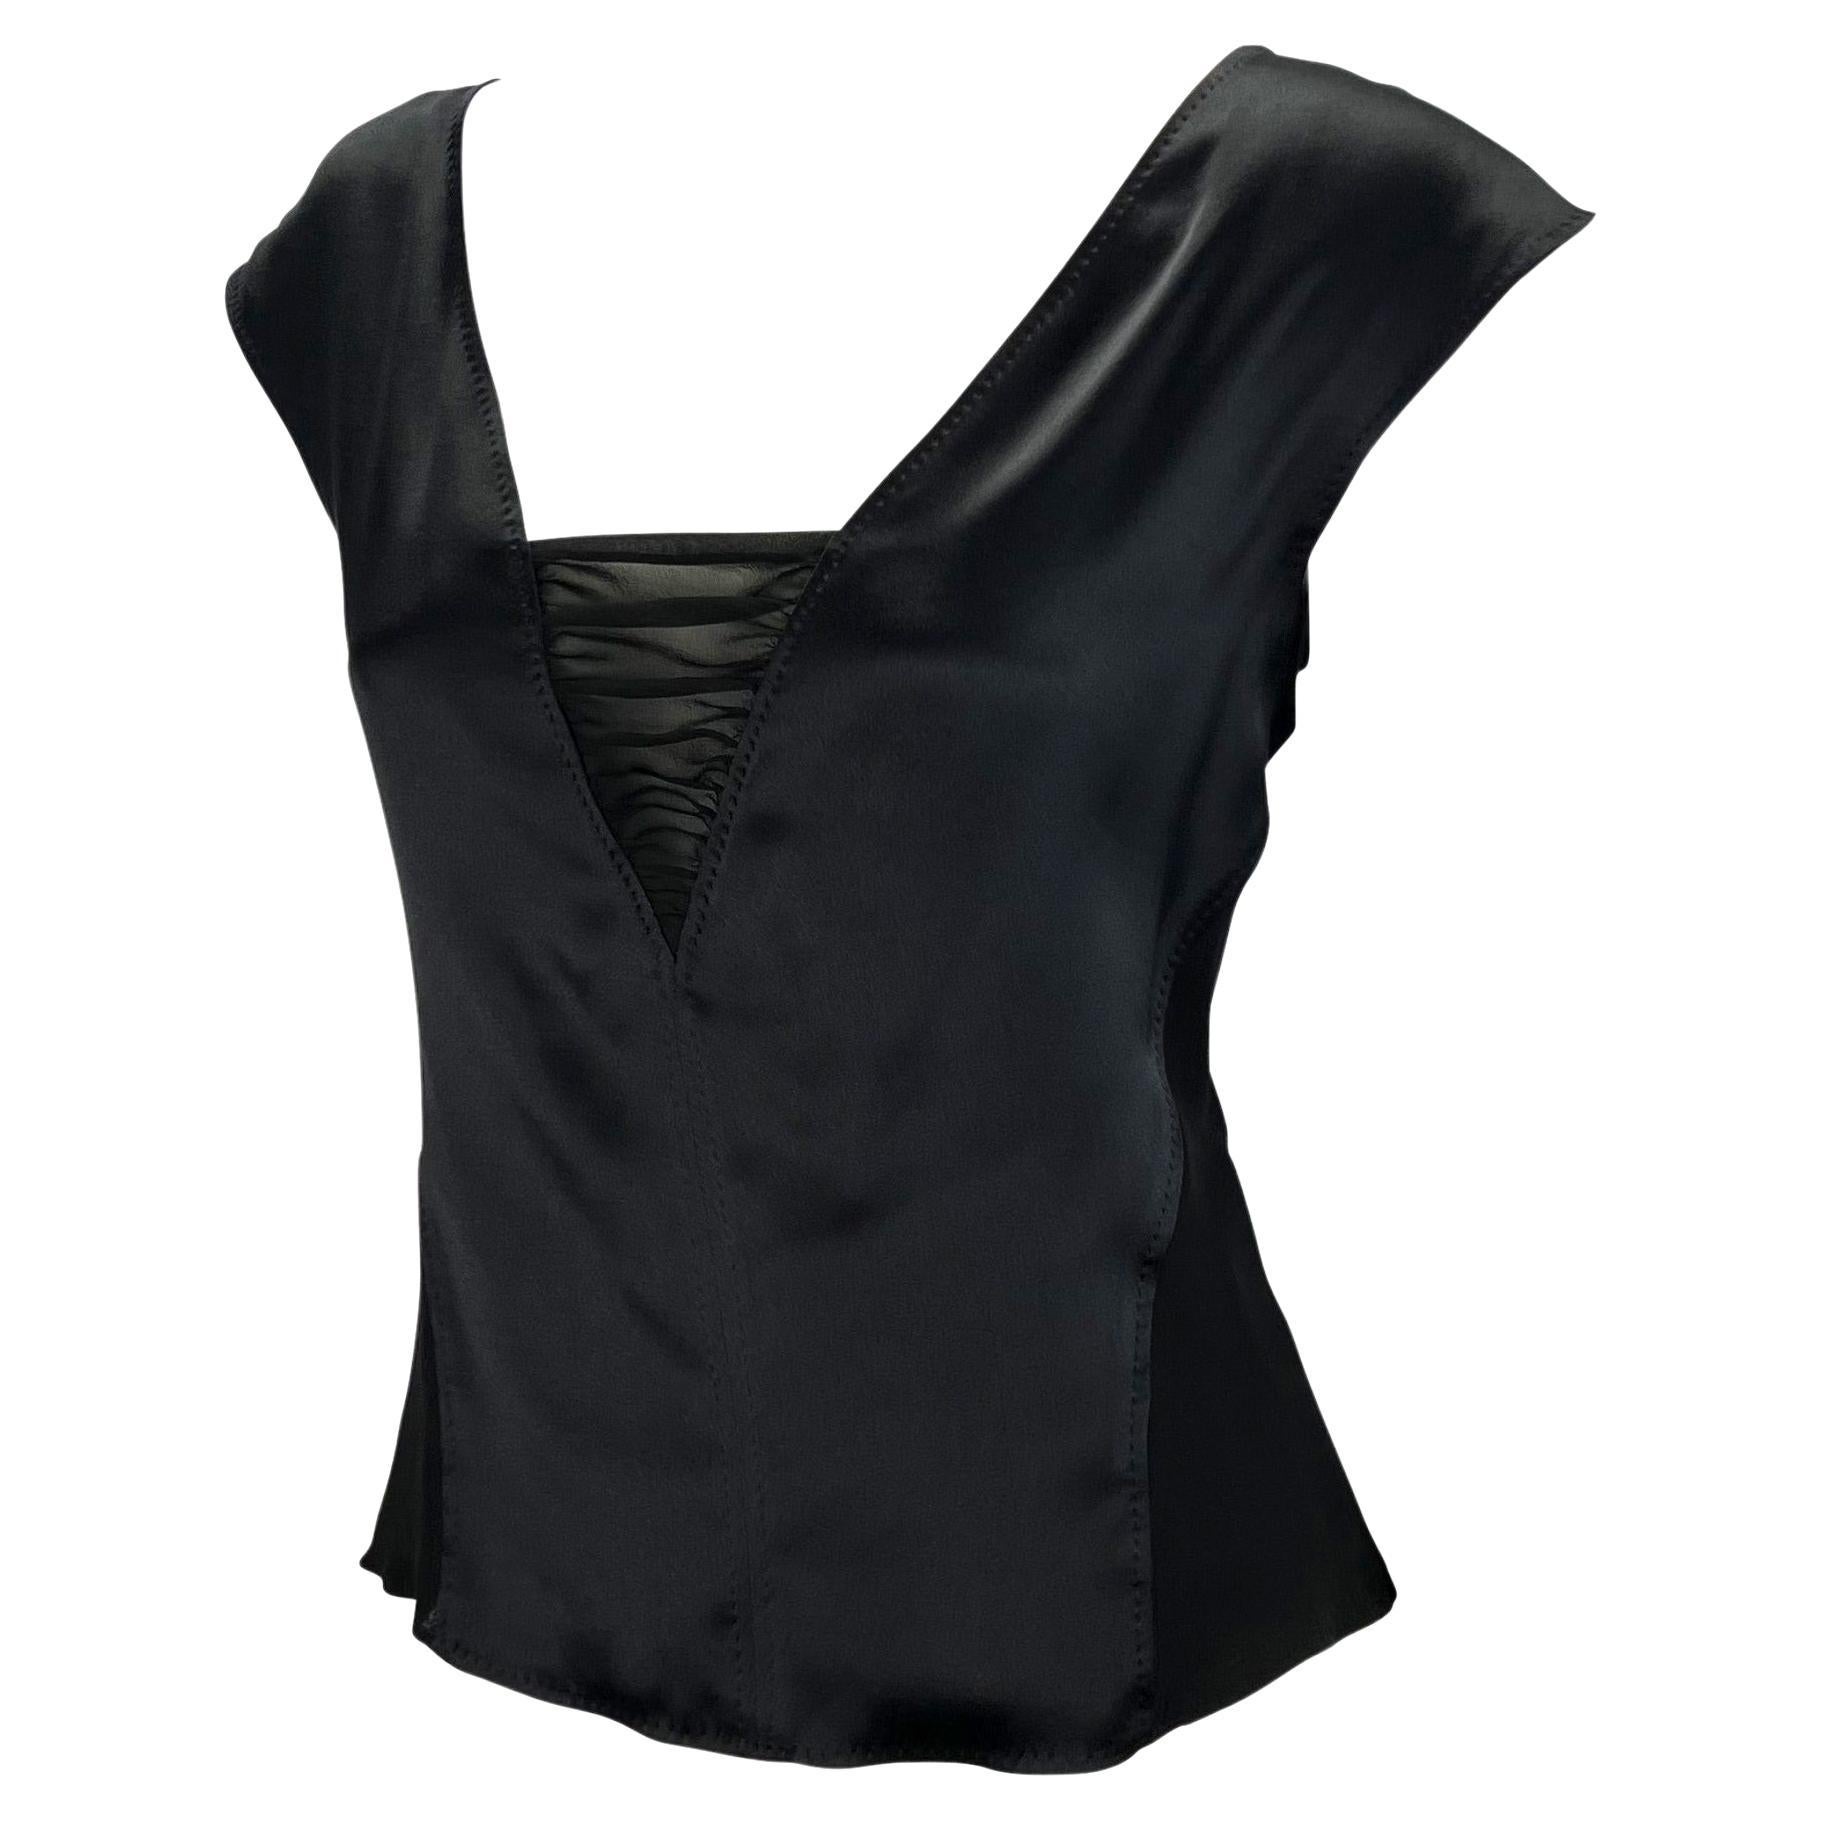 TheRealList presents: a crepe and satin silk panel top designed by Tom Ford in the early 2000s for Yves Saint Laurent Rive Gauche. The body of this top is constructed in sheer silk chiffon with ruching at the bottom of the deep v-shaped neckline.